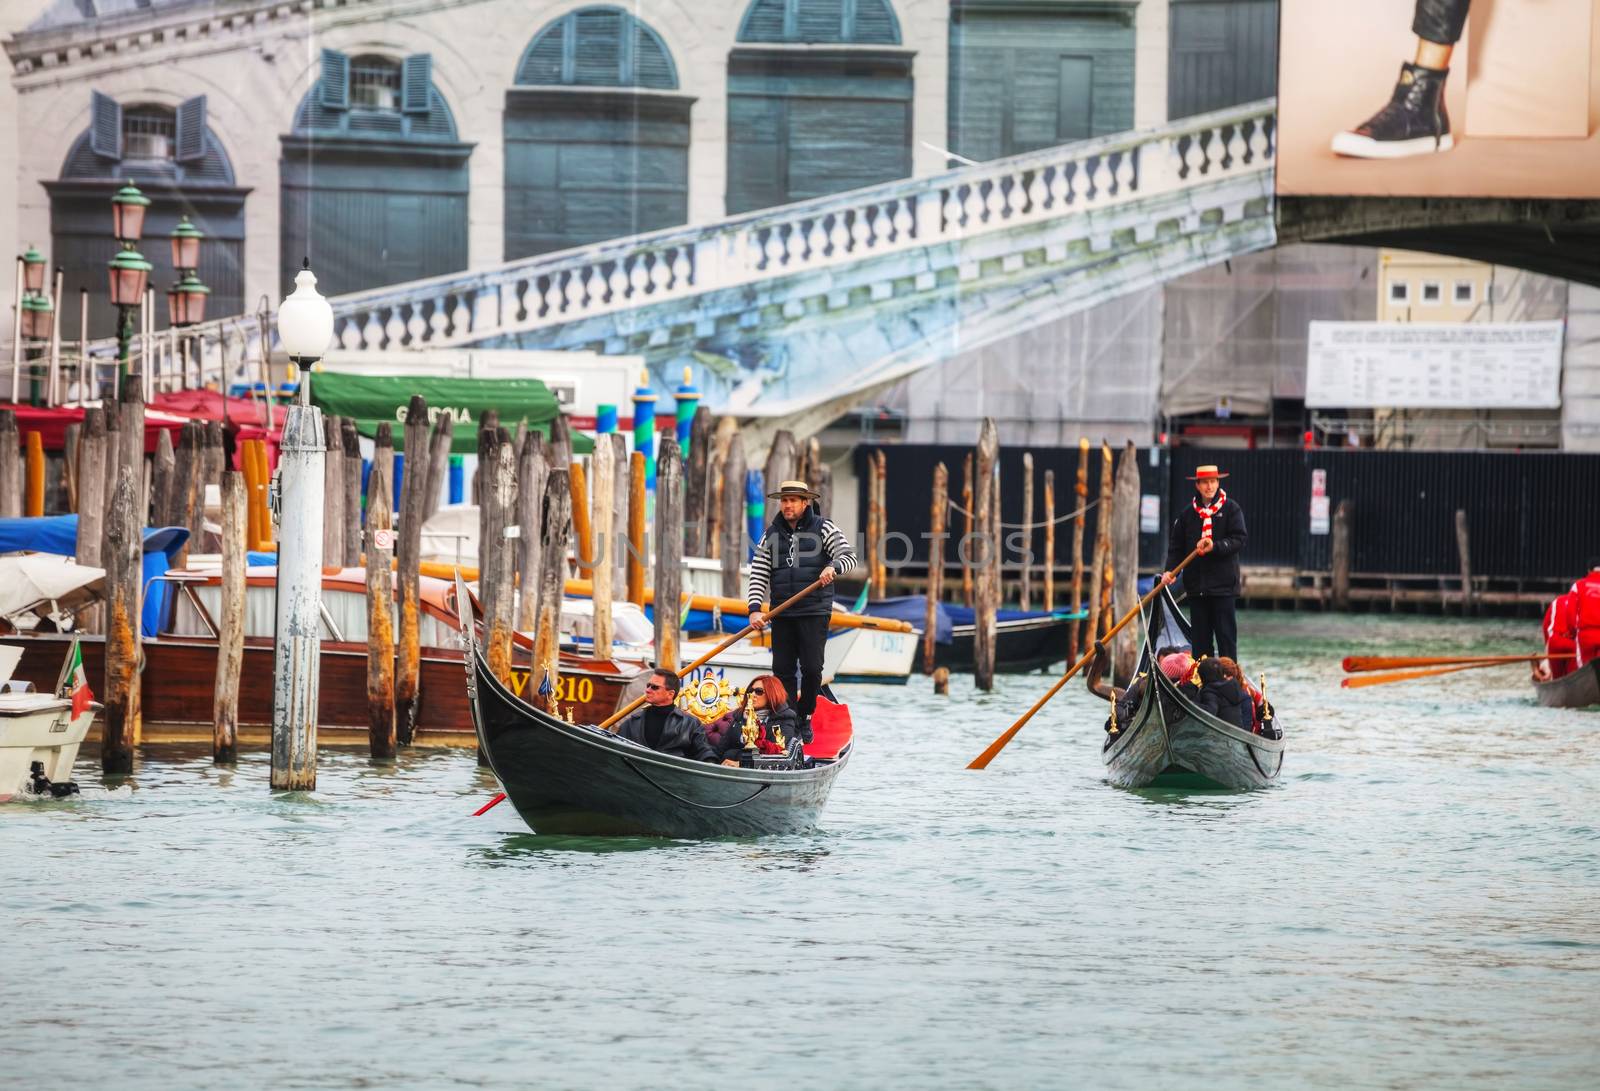 Gondolas with tourists in Venice, Italy by AndreyKr